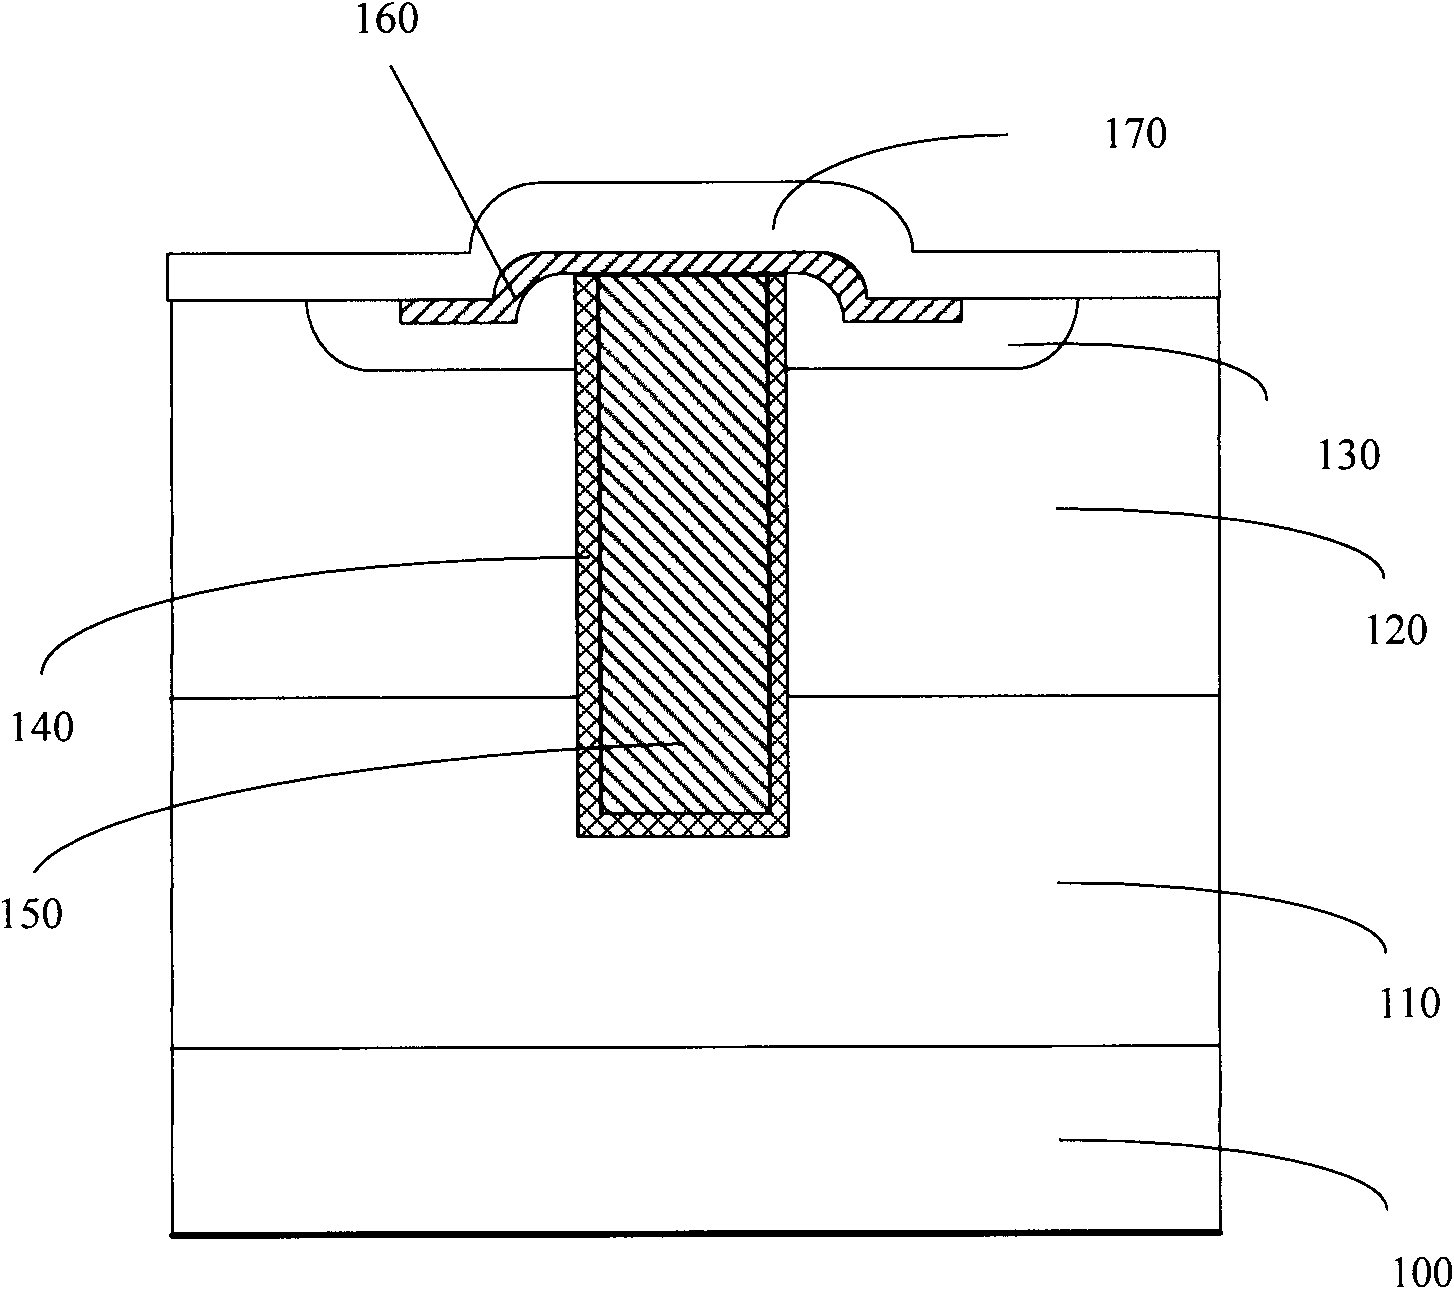 Method for treating groove and forming UMOS (U-shaped groove Metal Oxide Semiconductor) transistor